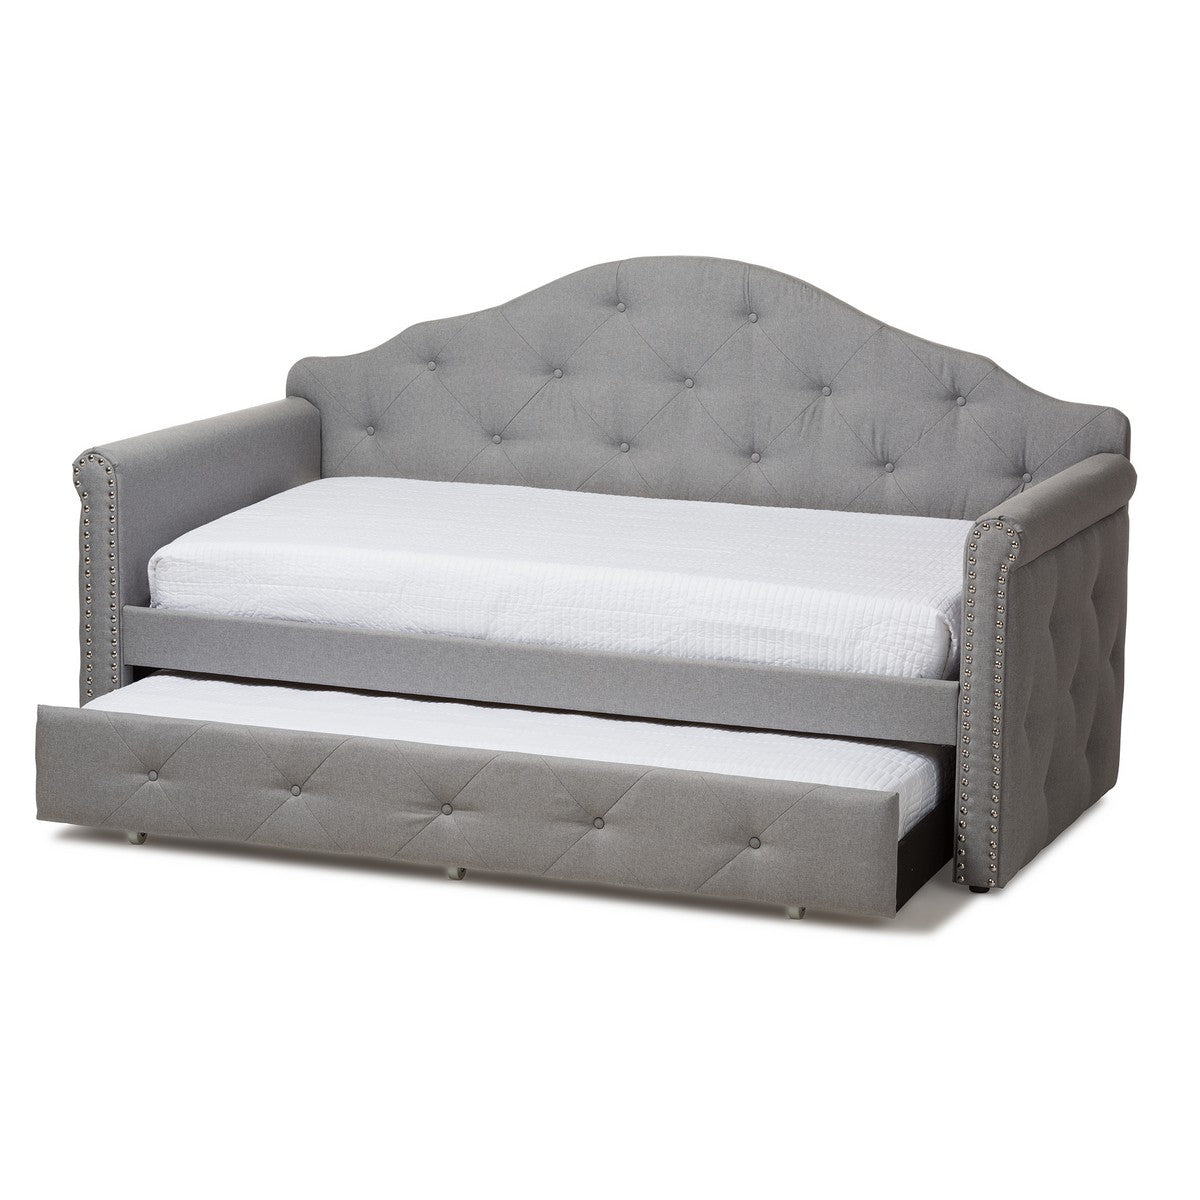 Baxton Studio Emilie Modern and Contemporary Grey Fabric Upholstered Daybed with Trundle